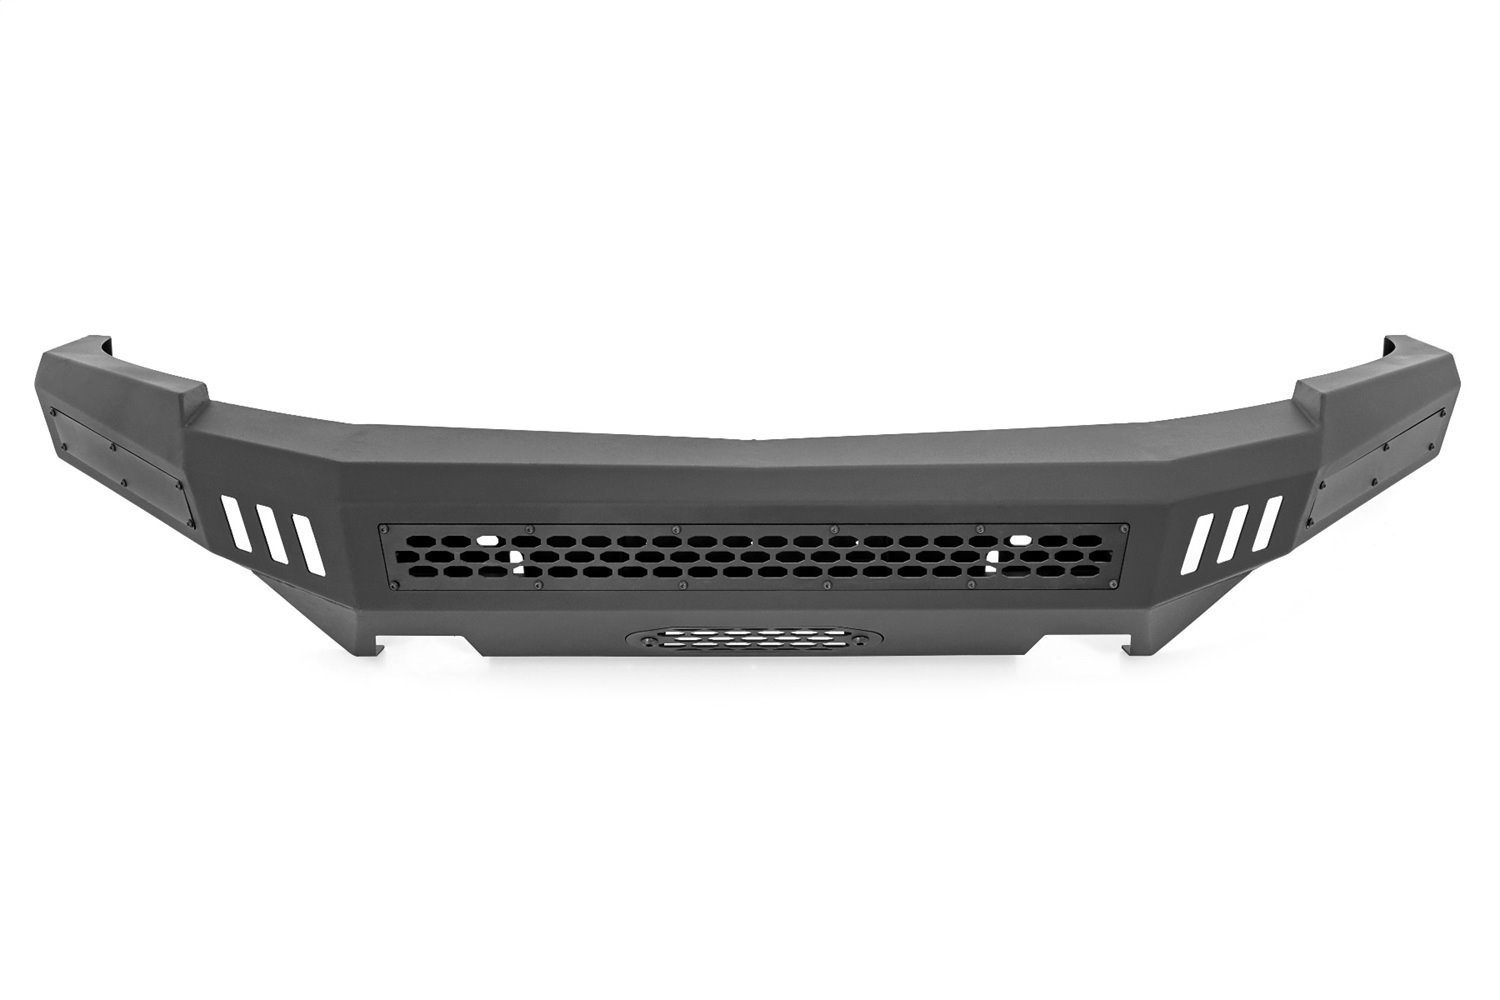 10910 Chevy Front High Clearance Bumper Kit (07-13